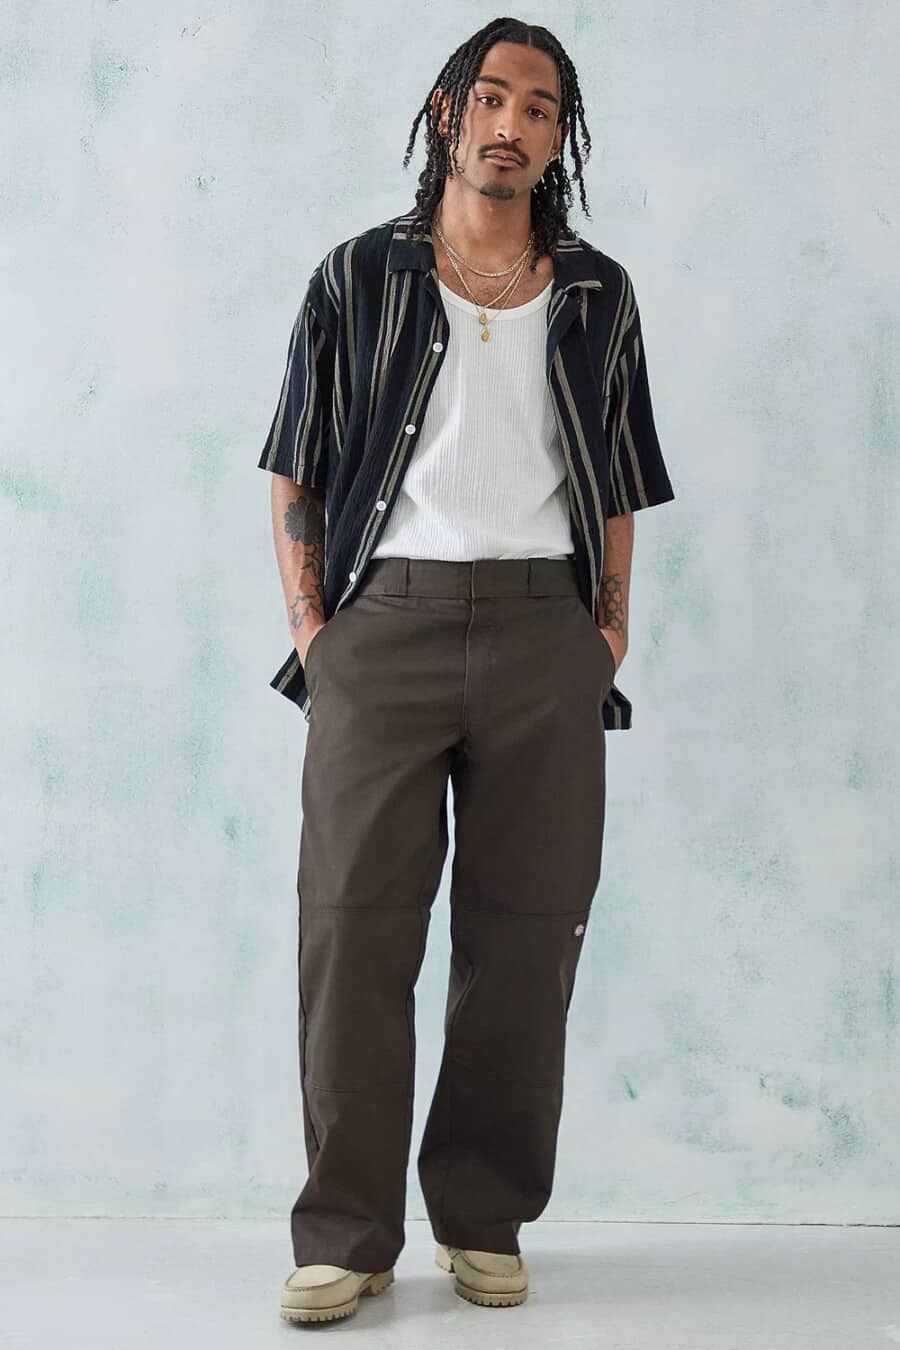 Men's wide-leg brown double knee pants, white vest, black and grey stripe short sleeve shirt and taupe boots outfit